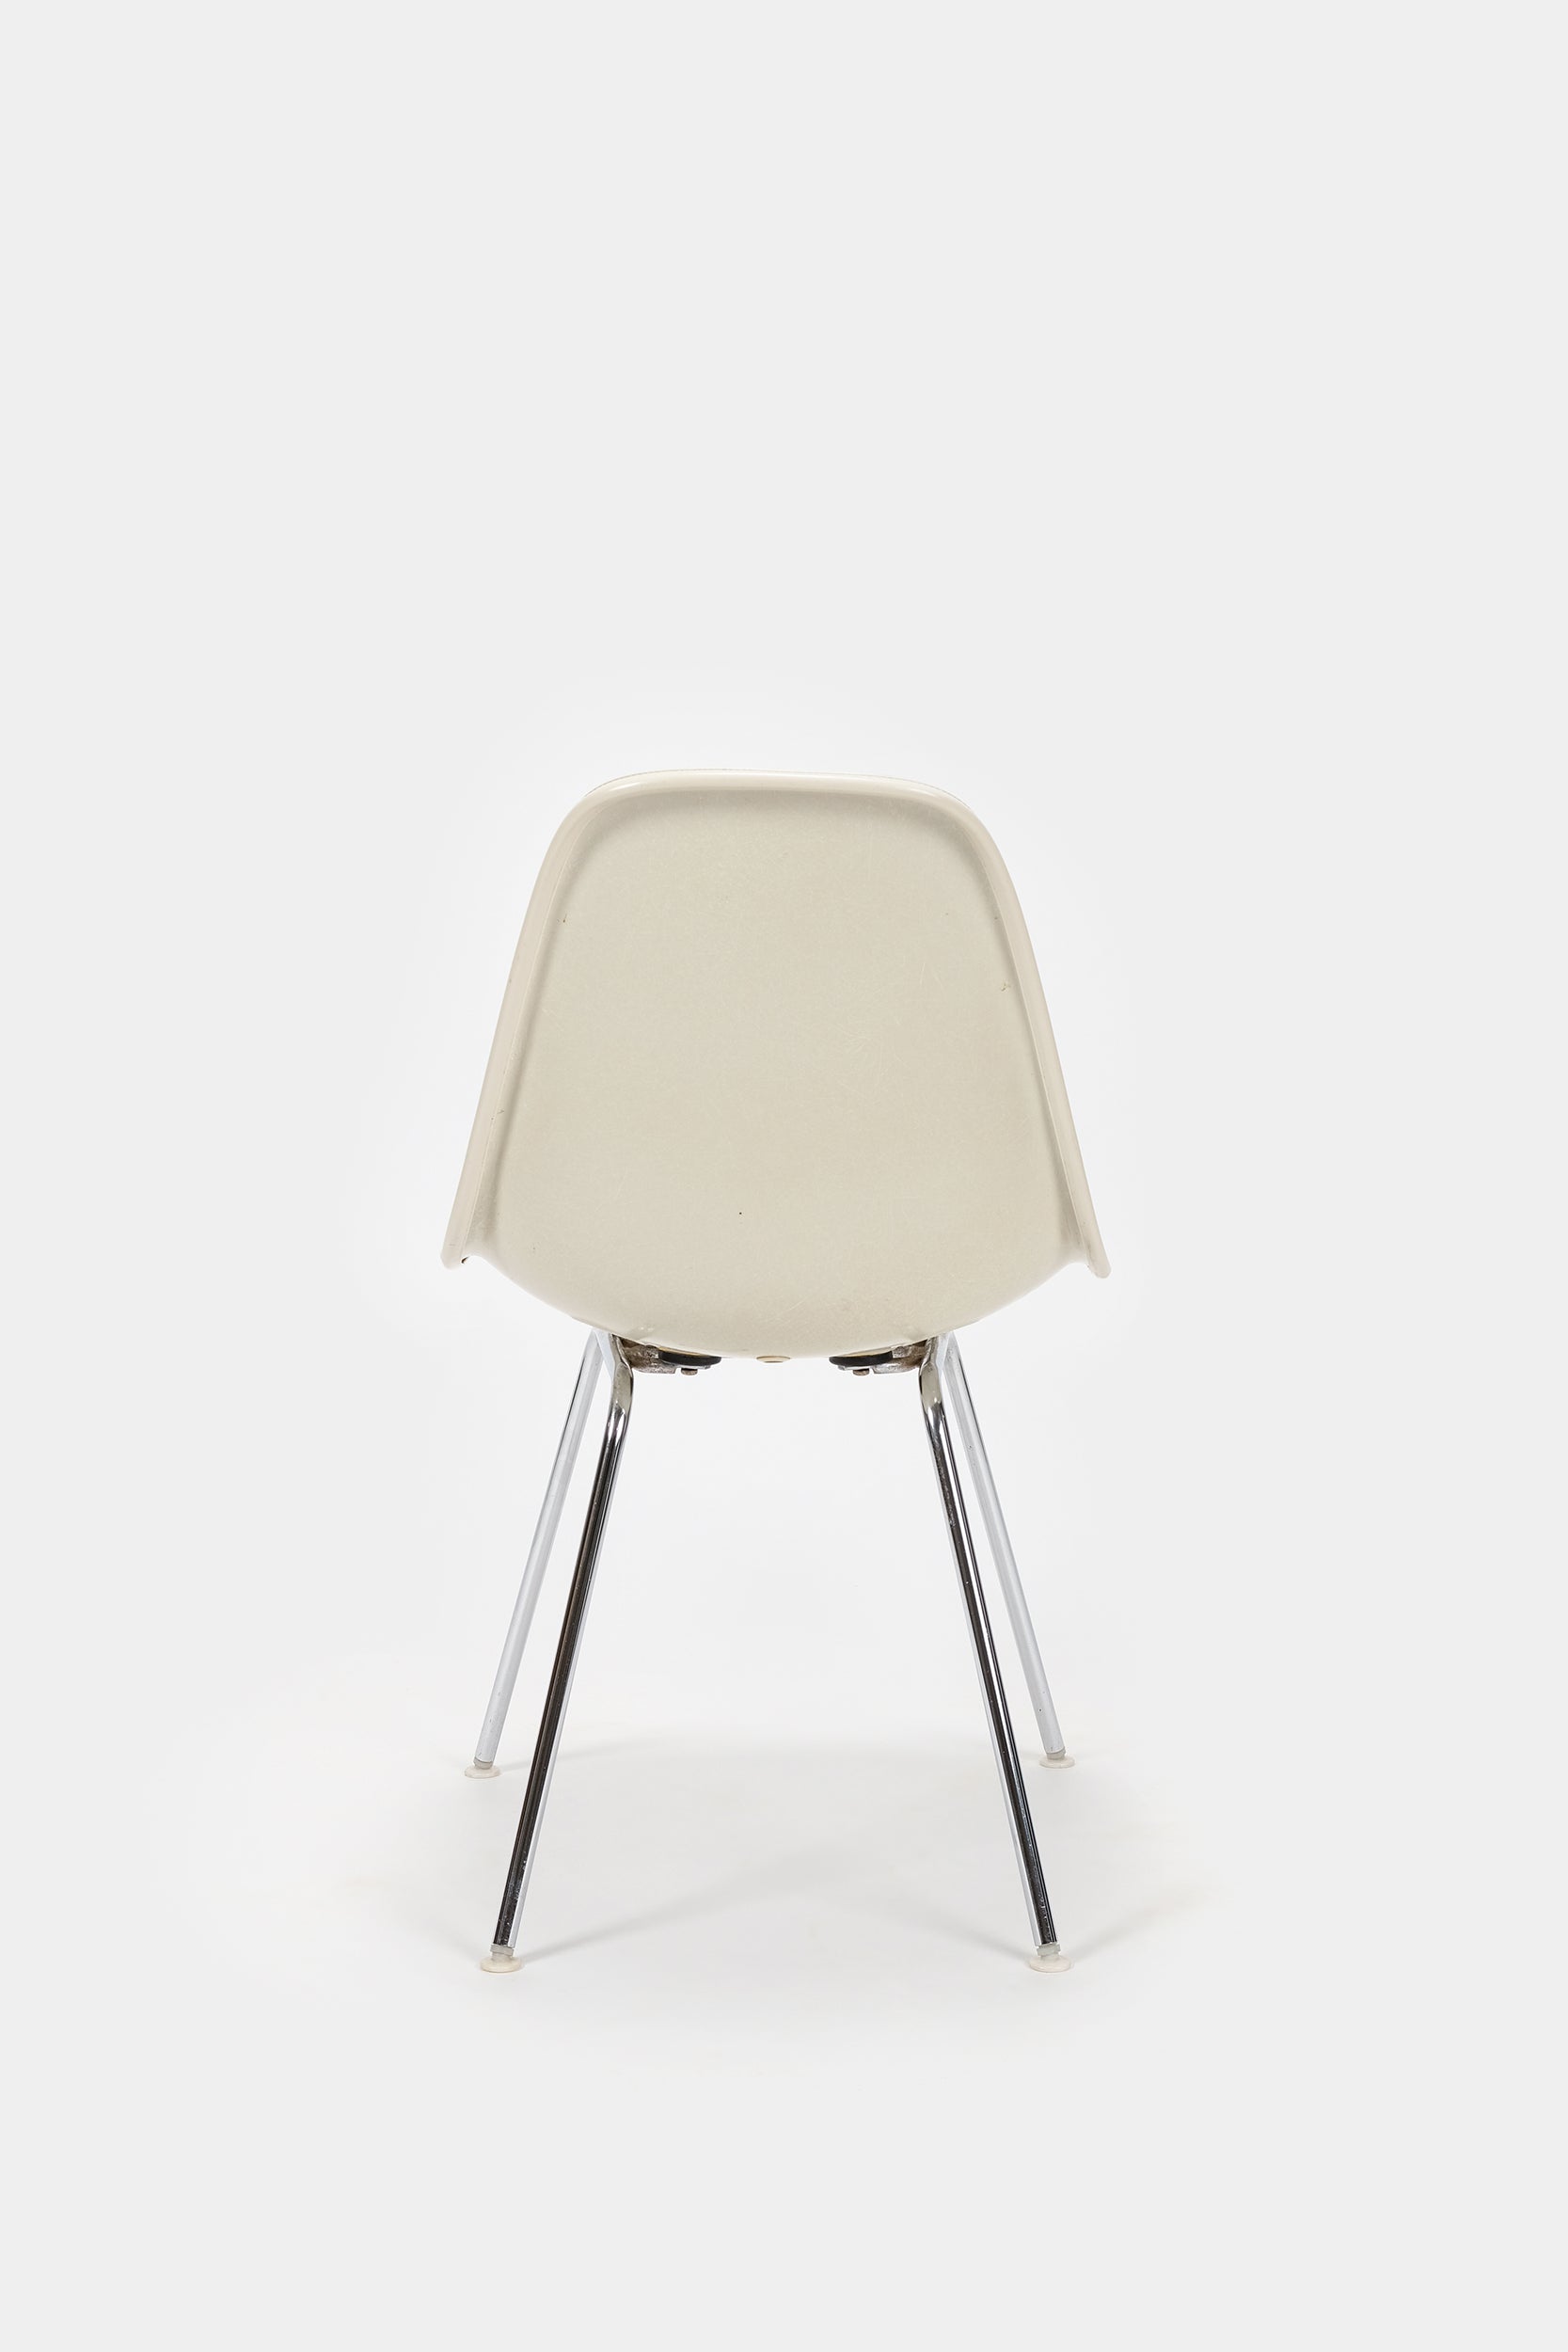 Charles Eames, Side Chair, Blue, 70s